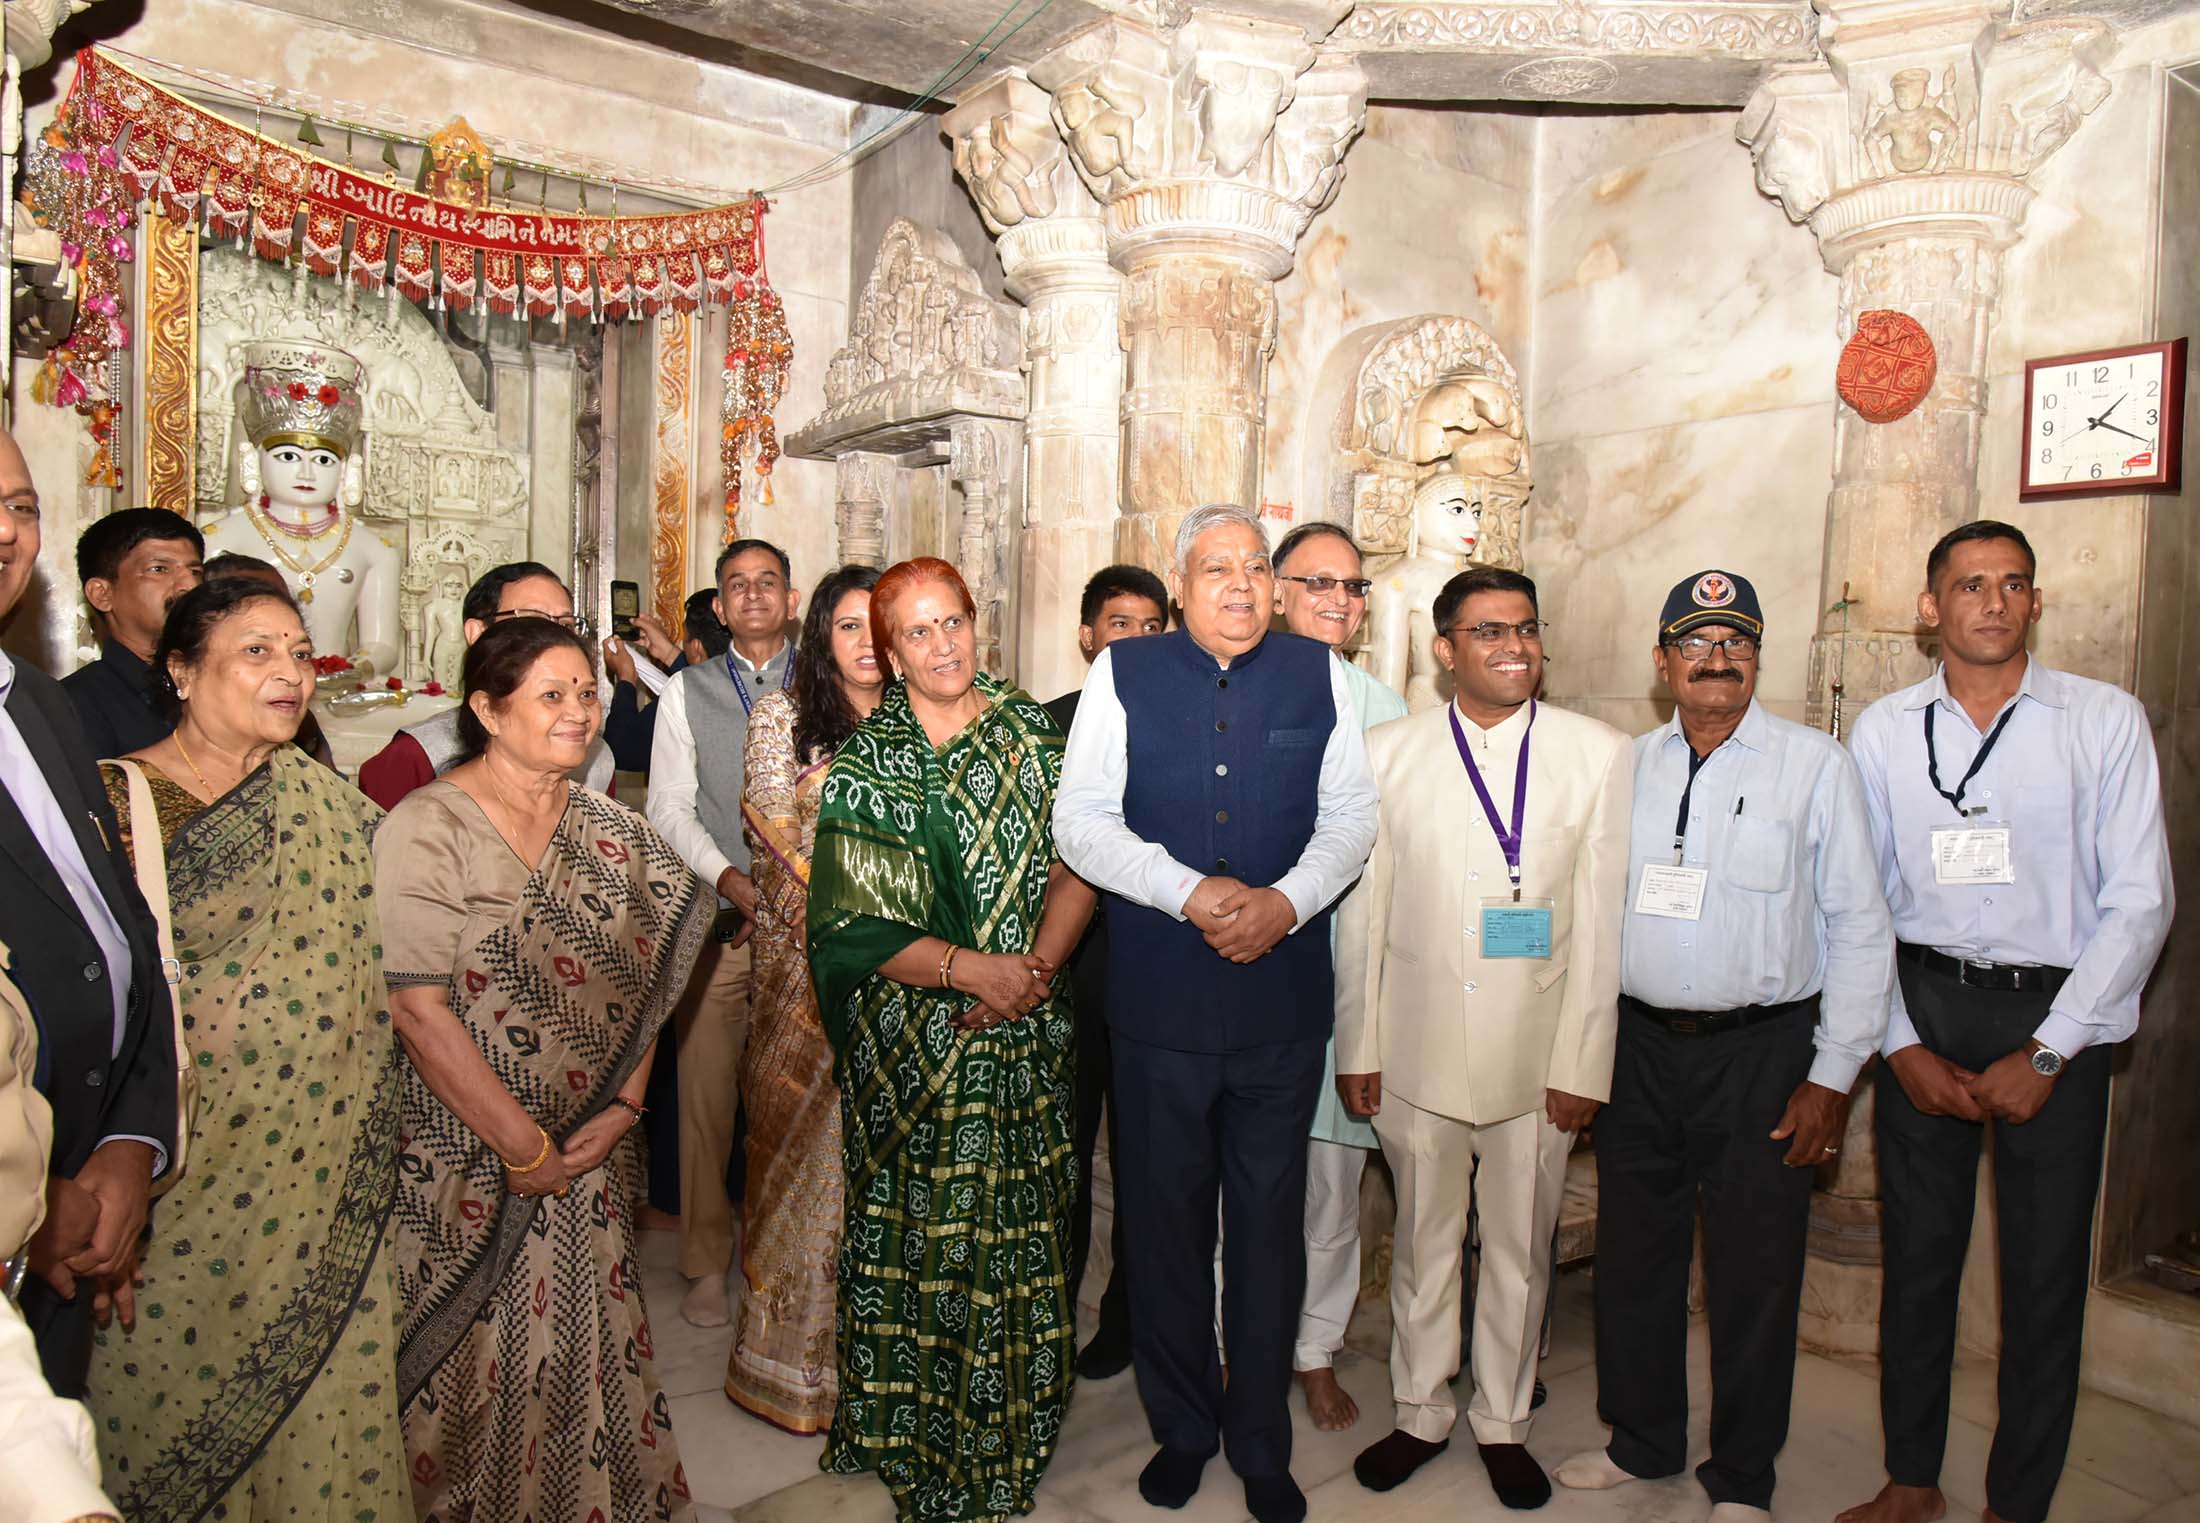 The Vice President, Shri Jagdeep Dhankhar and Dr Sudesh Dhankhar visiting the Dilwara Temples in Mount Abu, Rajasthan on 25 October, 2022